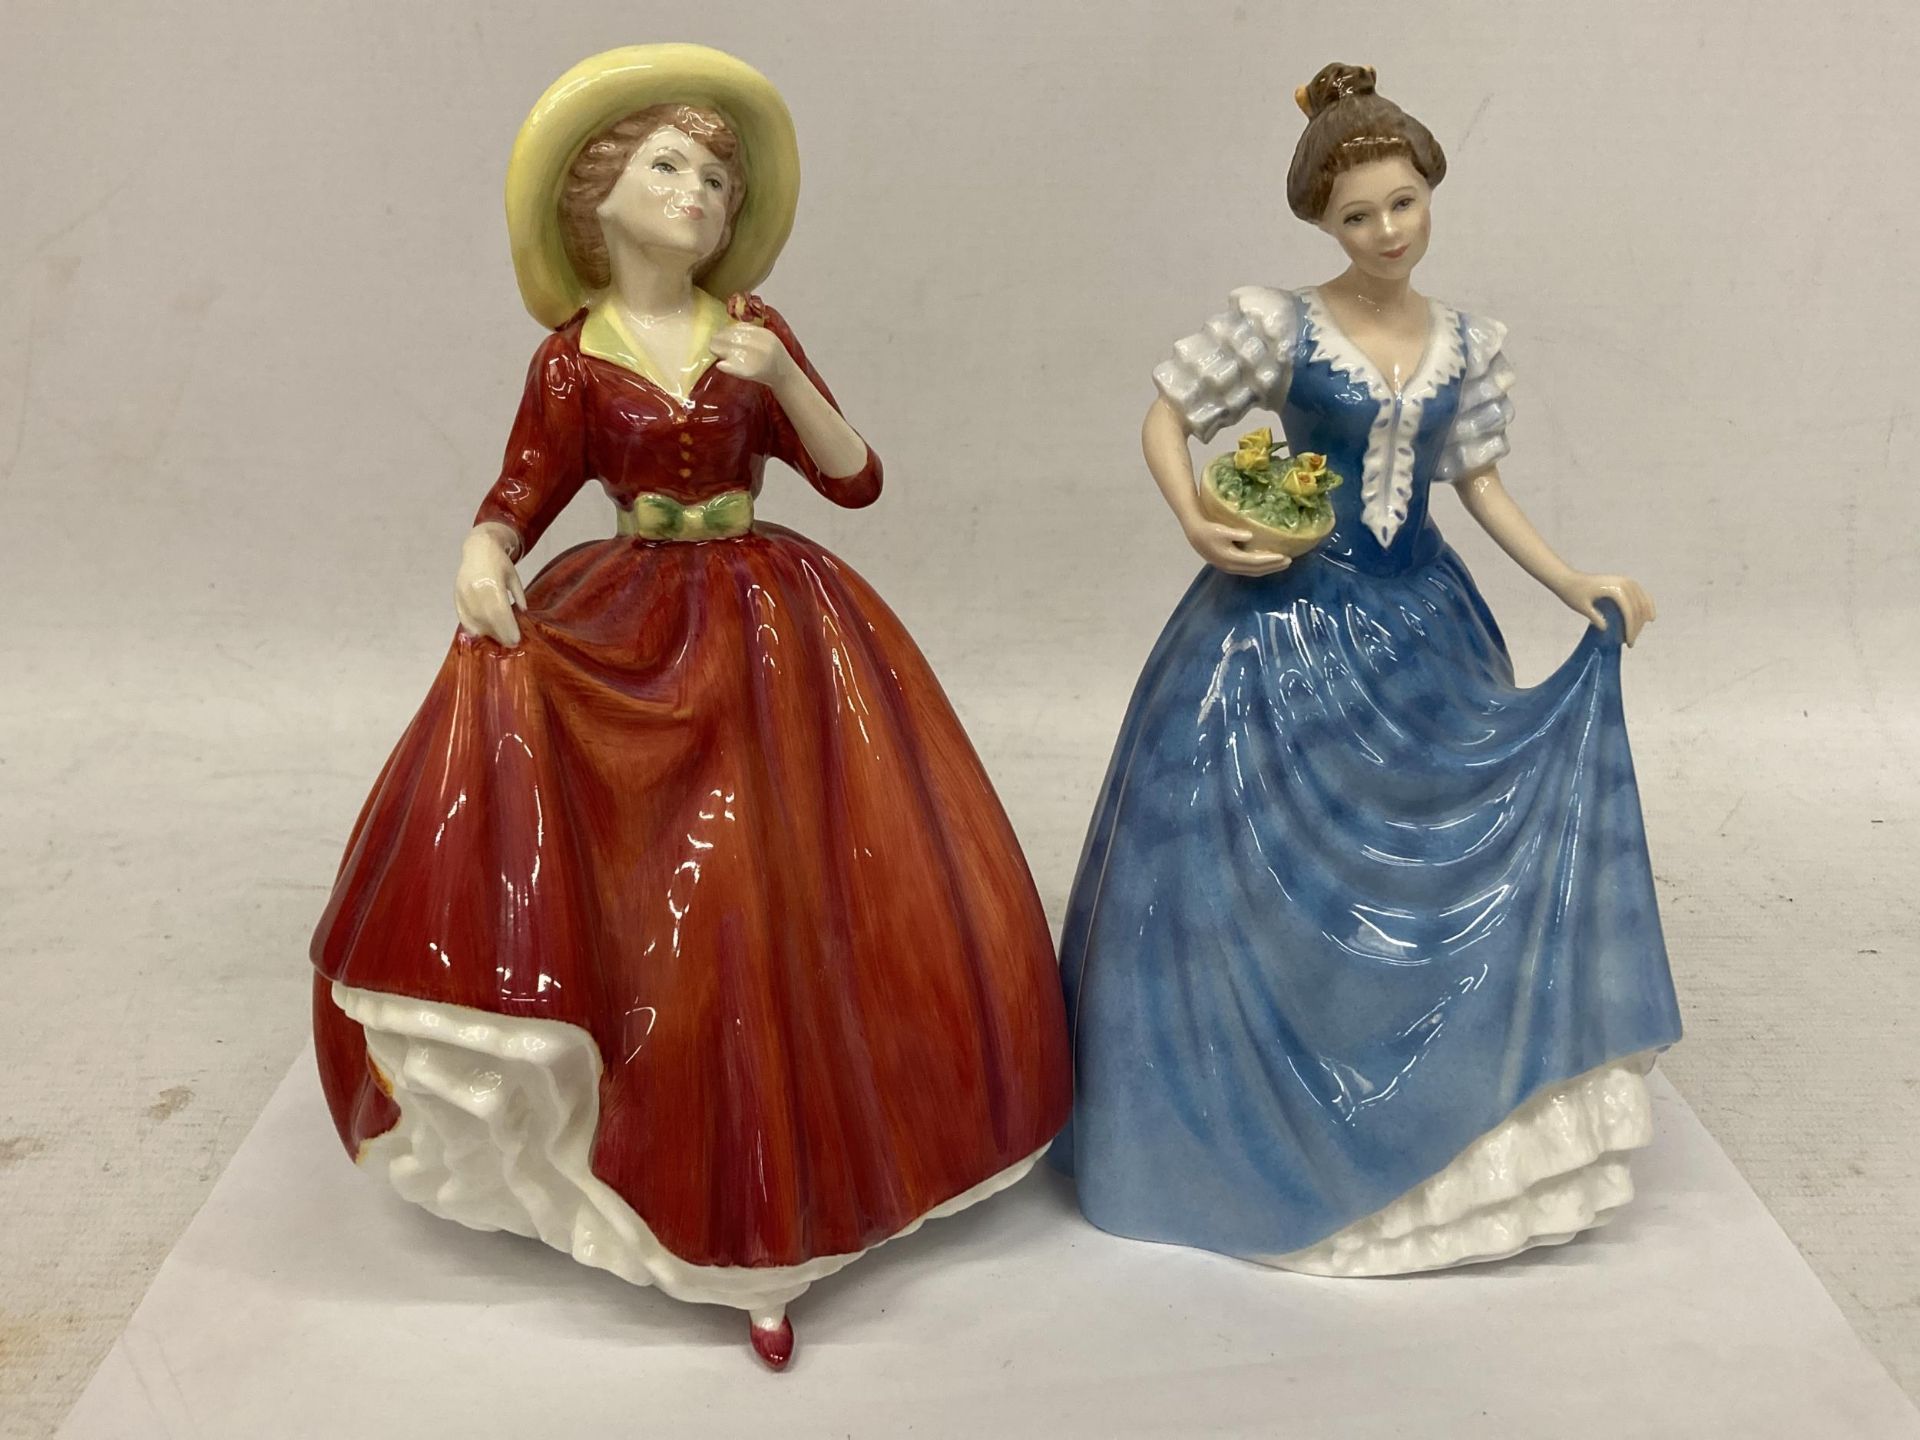 TWO ROYAL DOULTON FIGURINES "A SINGLE RED ROSE" HN 3376 AND "HELEN" HN3601